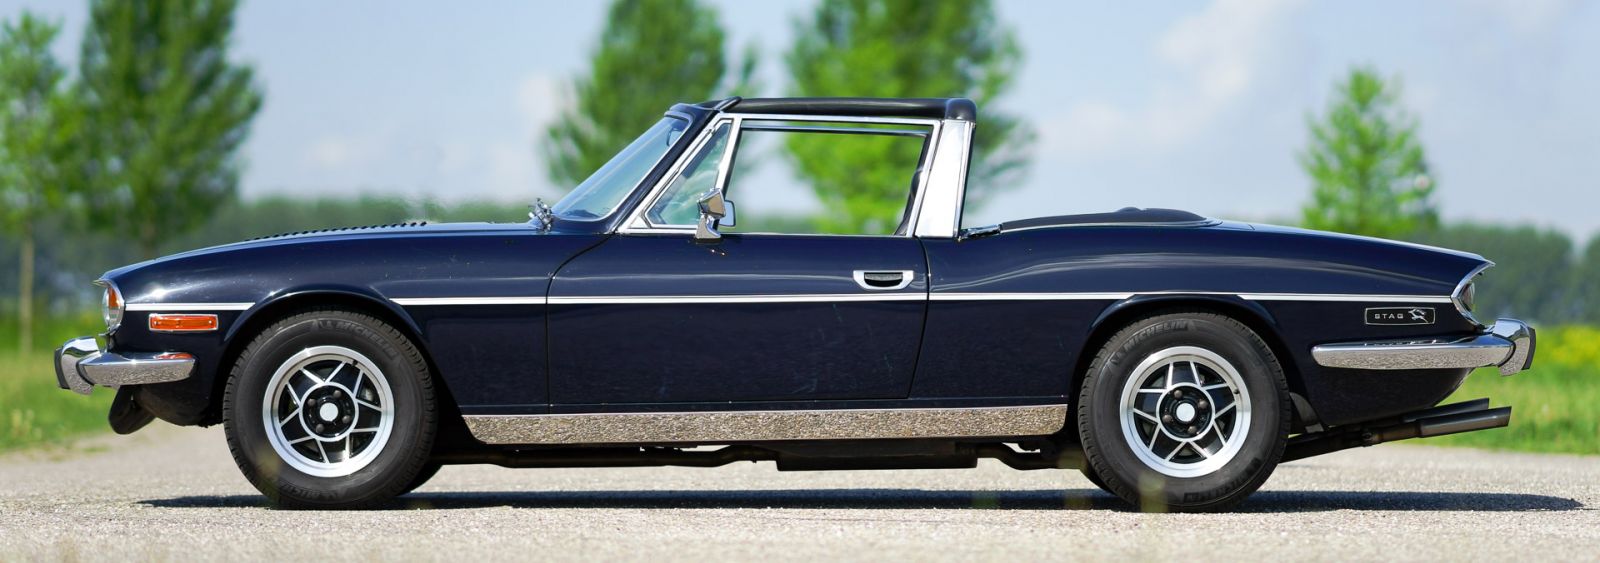 Nice wallpapers Triumph Stag 1600x563px